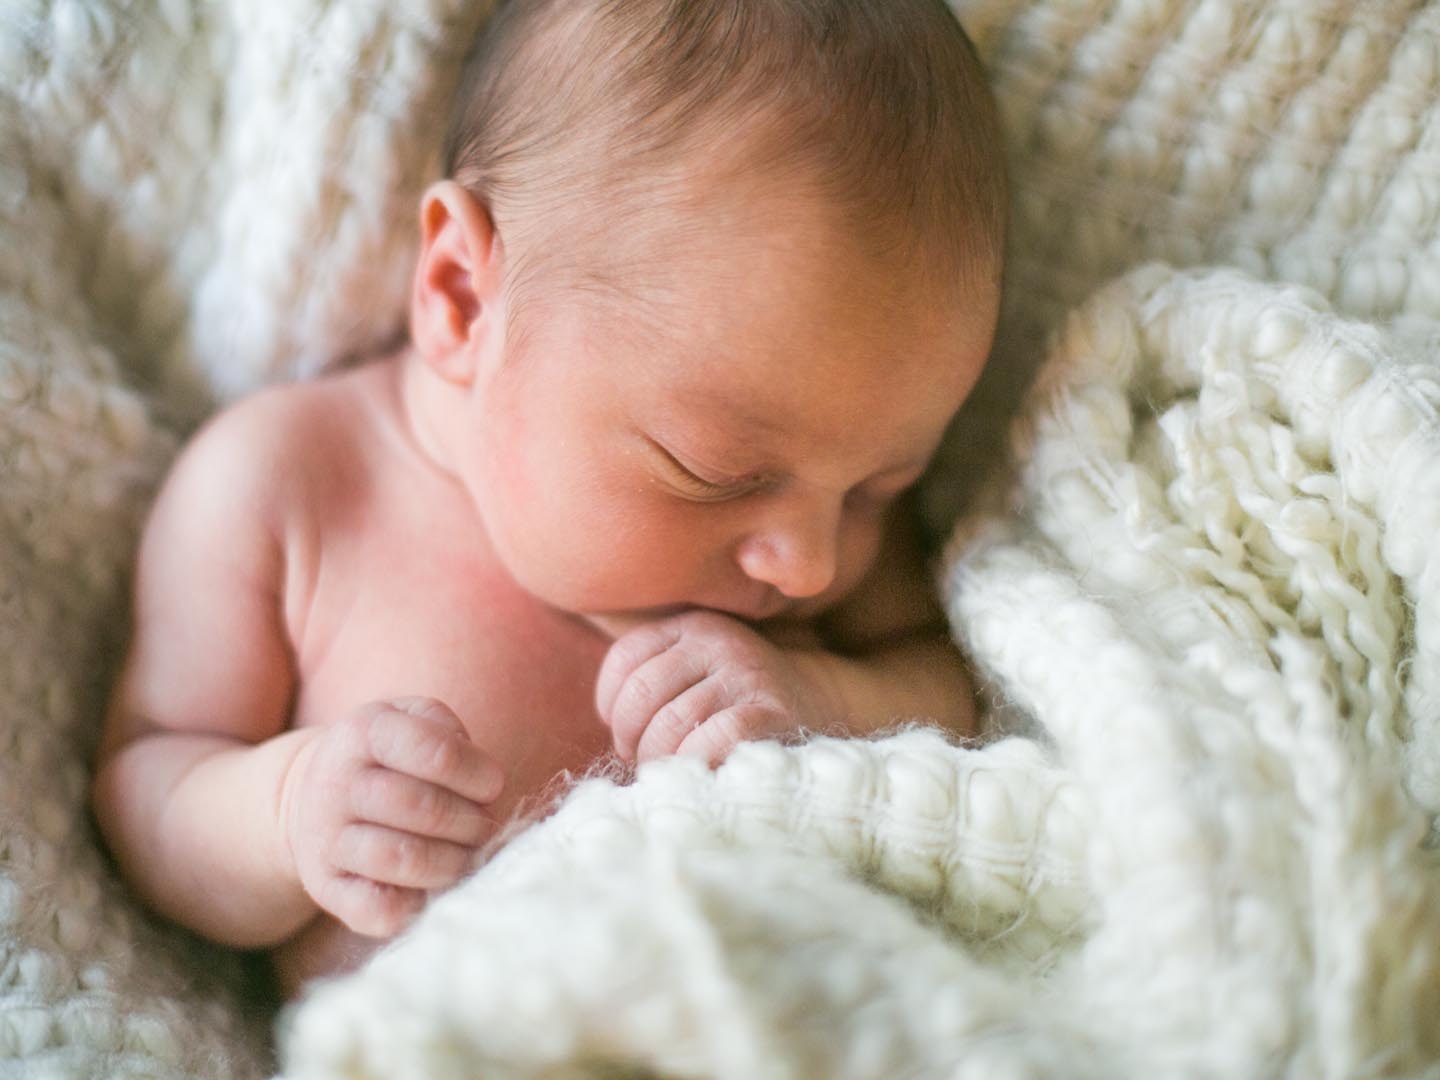 A brand new one week old baby boy sleeps wrapped in a white fuzzy blanket. He is peaceful and his hand rests near his mouth.